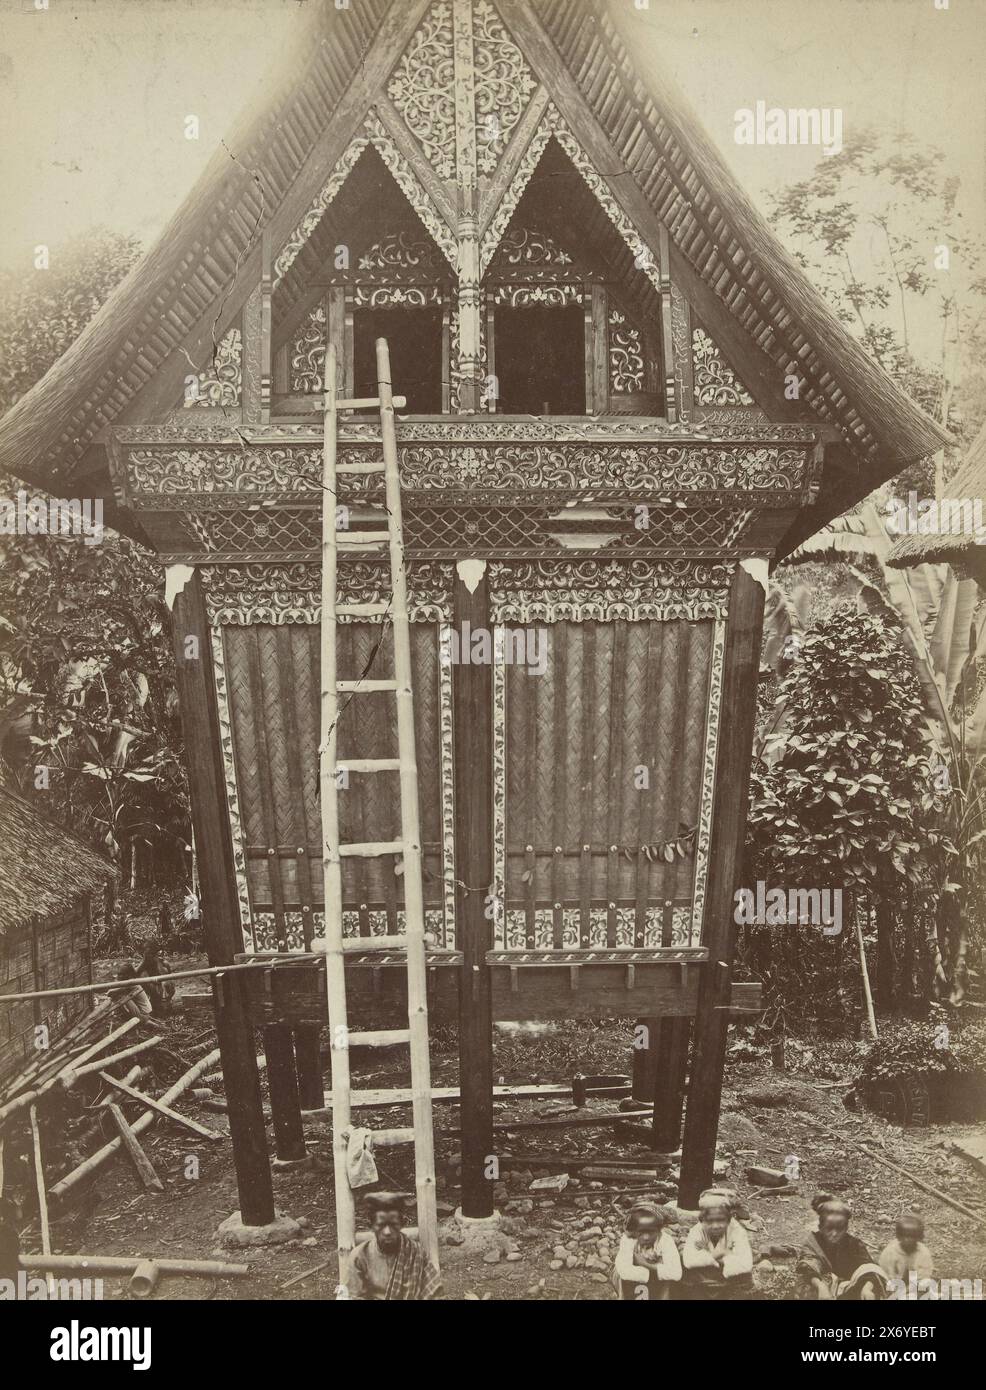 Rice barn with wood carvings in West Sumatra, Sumatra. Fort de Kock - Lombang (Rice Barn) (title on object), photograph, Woodbury & Page, (mentioned on object), Sumatra, 1860 - 1890, paper, albumen print, height, 240 mm × width, 183 mm, height, 265 mm × width, 204 mm Stock Photo